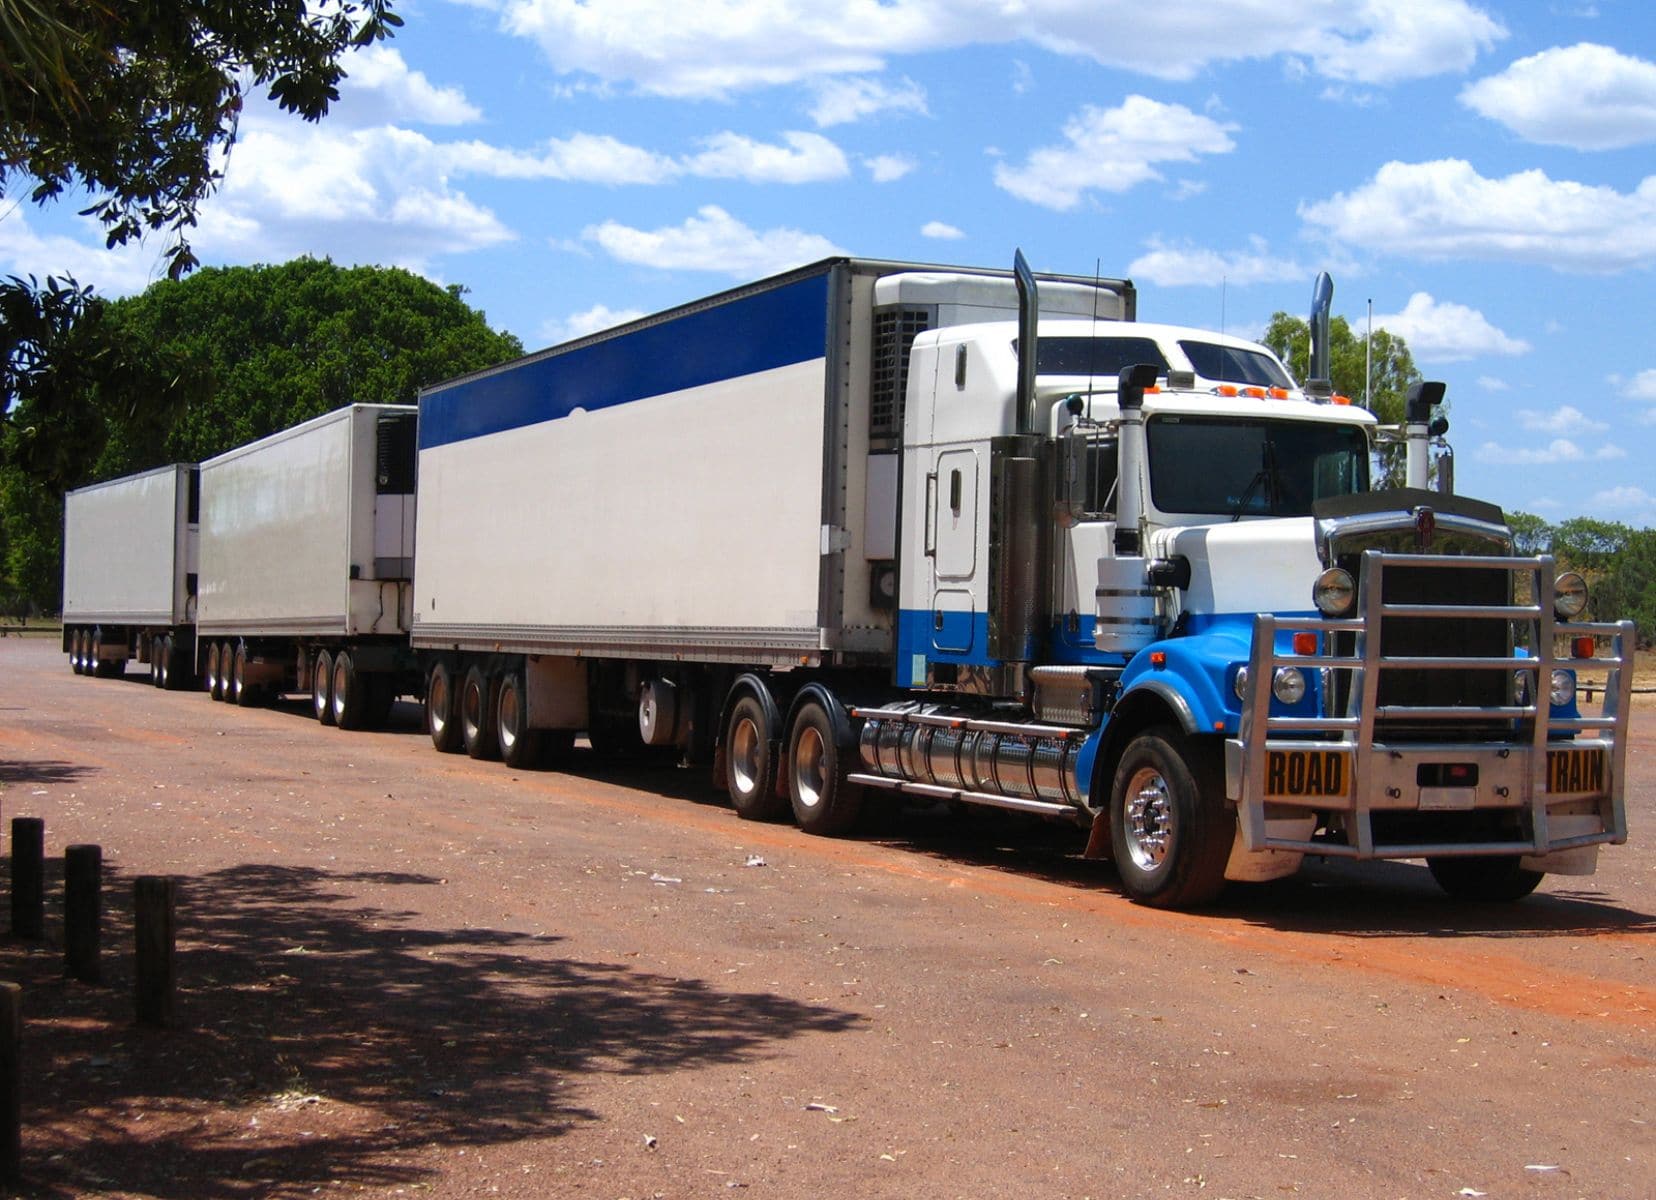 Australian Road Train with three large trucks attached